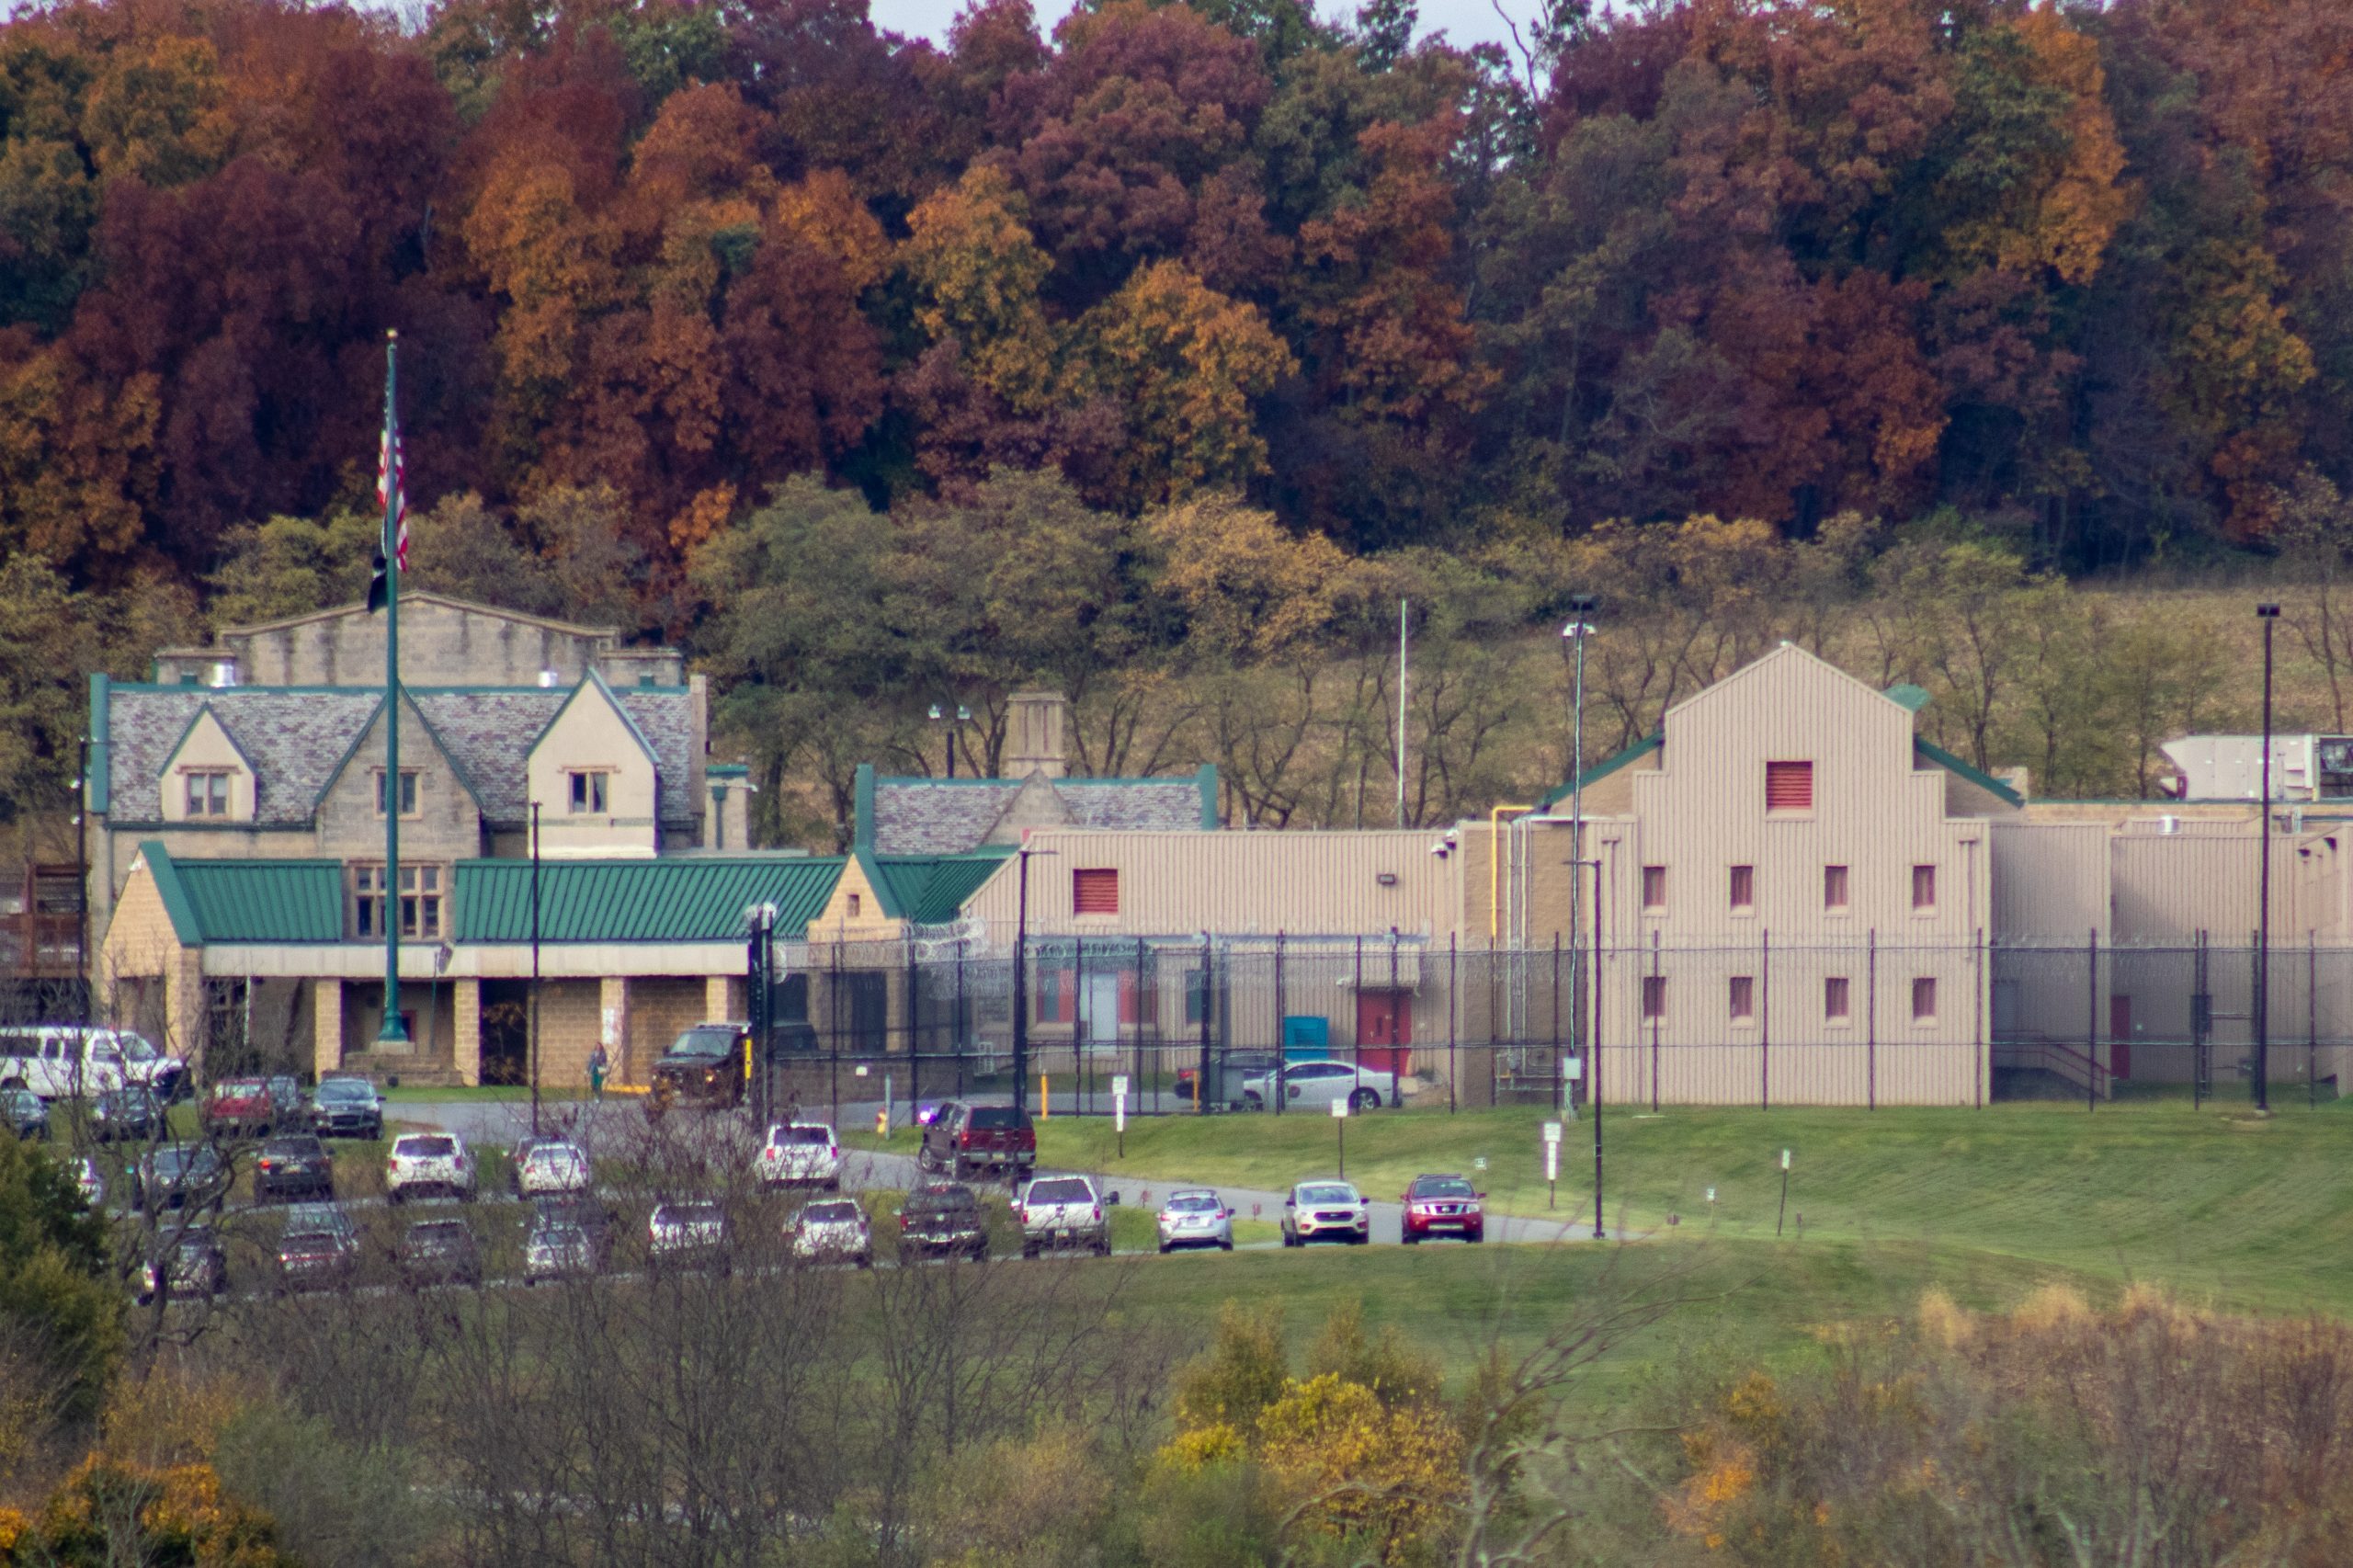 Prison in Berks County with Cars parked in parking lot